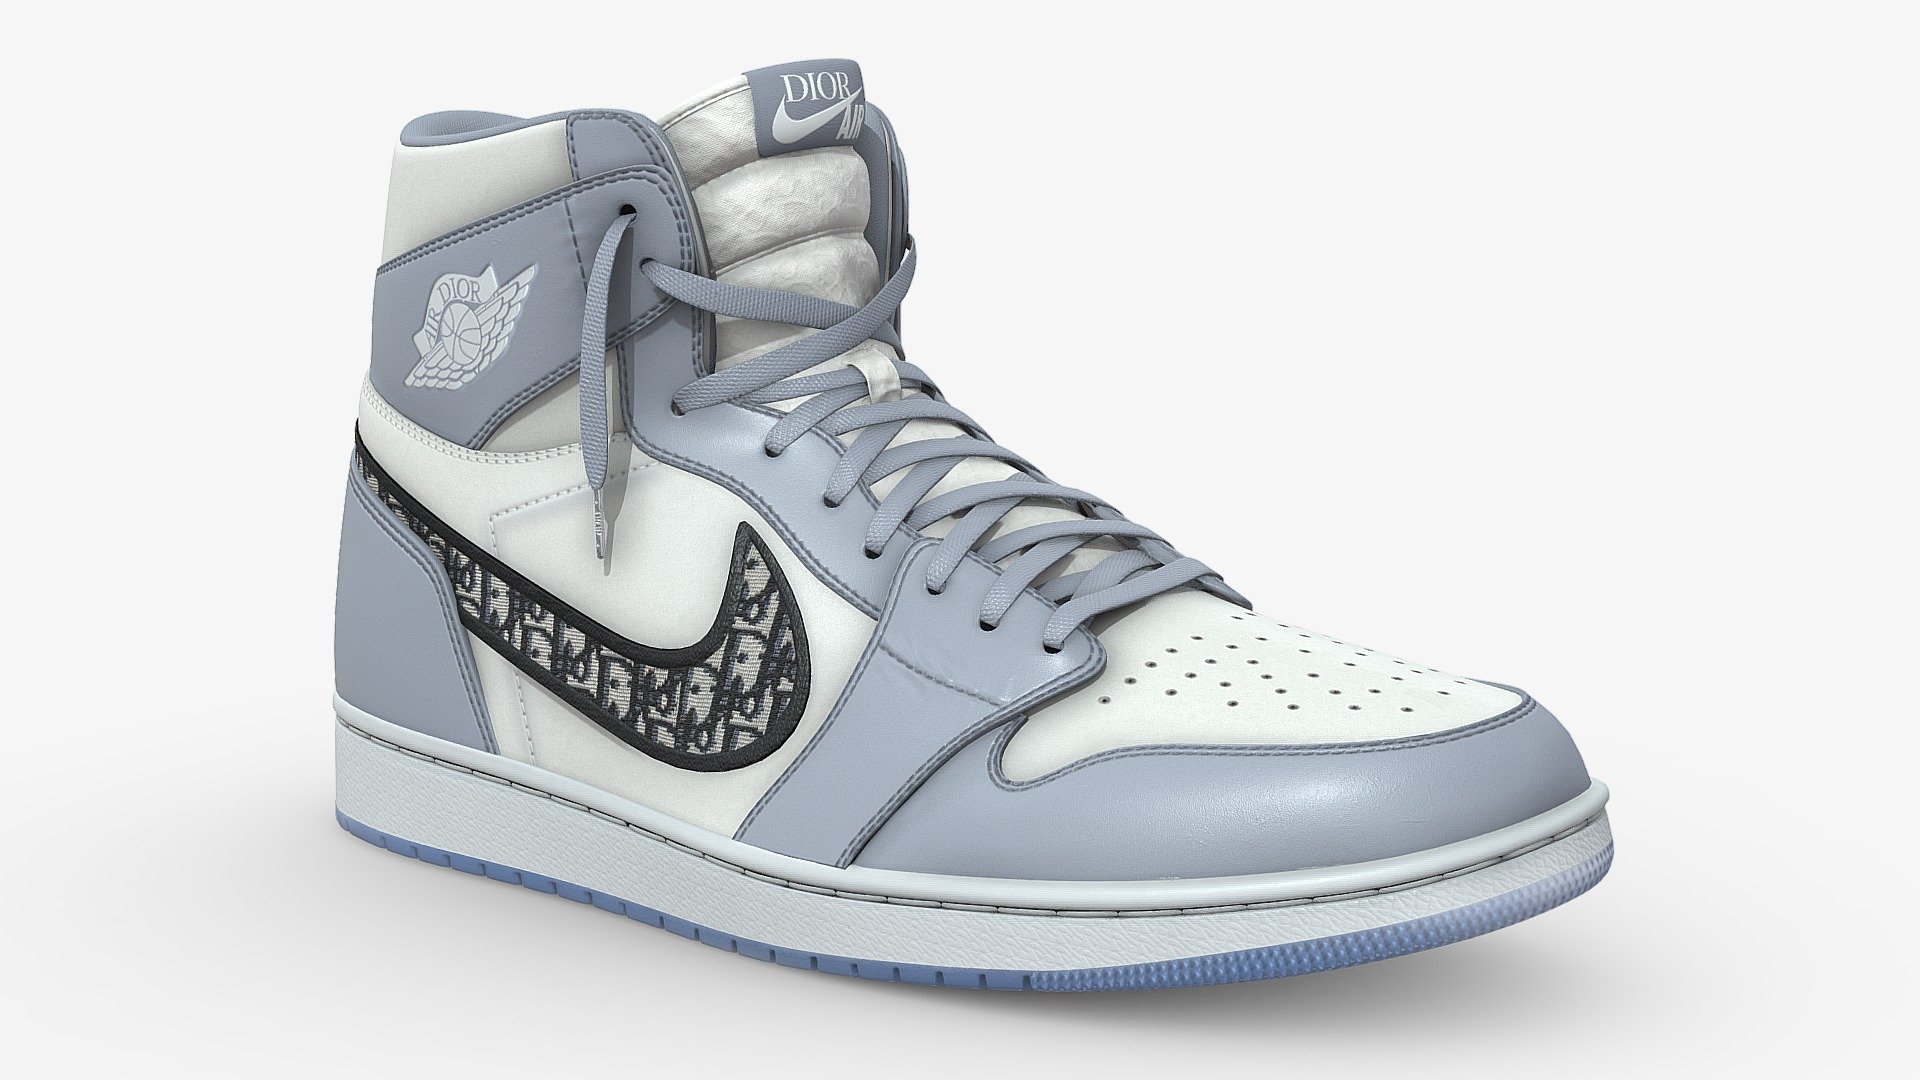 Jordan 1 x Dior. Combining the luxury fashion of Christian Dior with the iconic Jordan 1 silohouette, this collaboration was an instant classic

Modelled in Blender and textured in Substance, no detail went overlooked in the creation of this shoe. As a result it is subdivision ready. Unwrapped with efficiency in mind both left and right shoes are mostly identical, save for one texture set which required both a left and right version. As a result this model has 5 texture sets, with 5 textures in each set (Base Color, Metalness, Roughness, Normal, Ambient Occlusion) along with two opacity maps. Opacity can be achieved using the alpha map of the base colour also. 

Download File Contents:
1. Native Blender file with textures linked
2. Folder containing all 27 textures in 4096x4096 png format (along with an additional version of the sole texture) 
3. A &ldquo;Low Poly